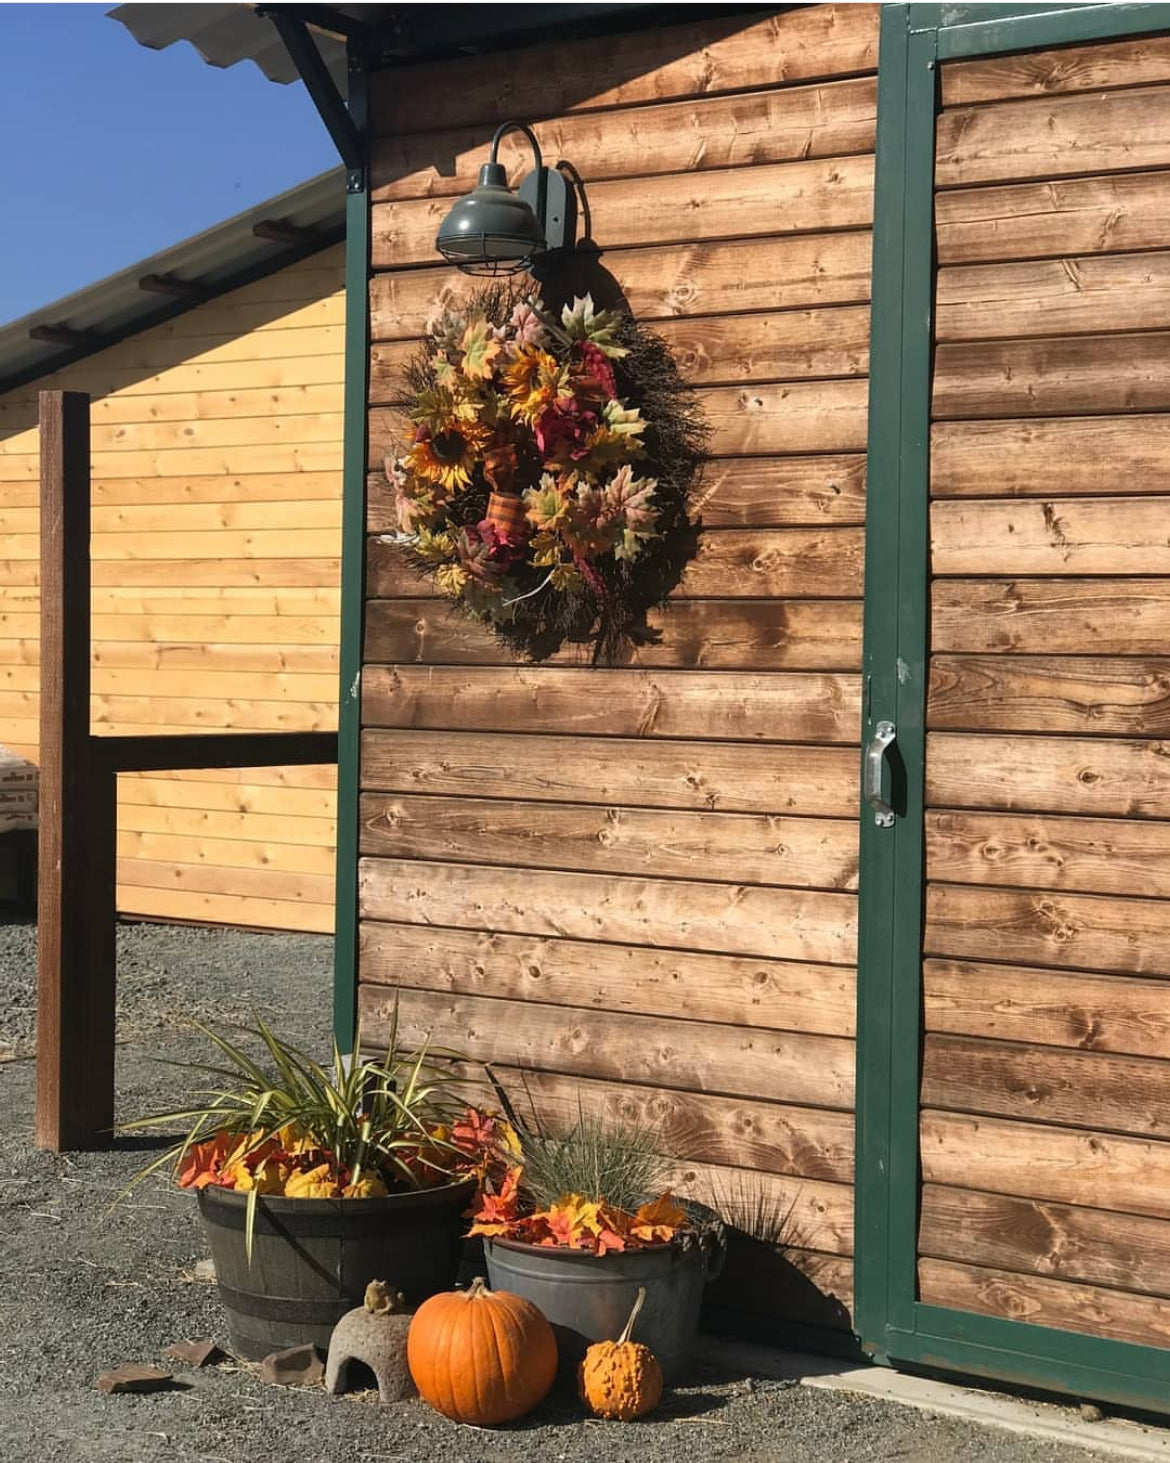 The right side photos shows the edge of the barn decorated for fall with pumpkins.